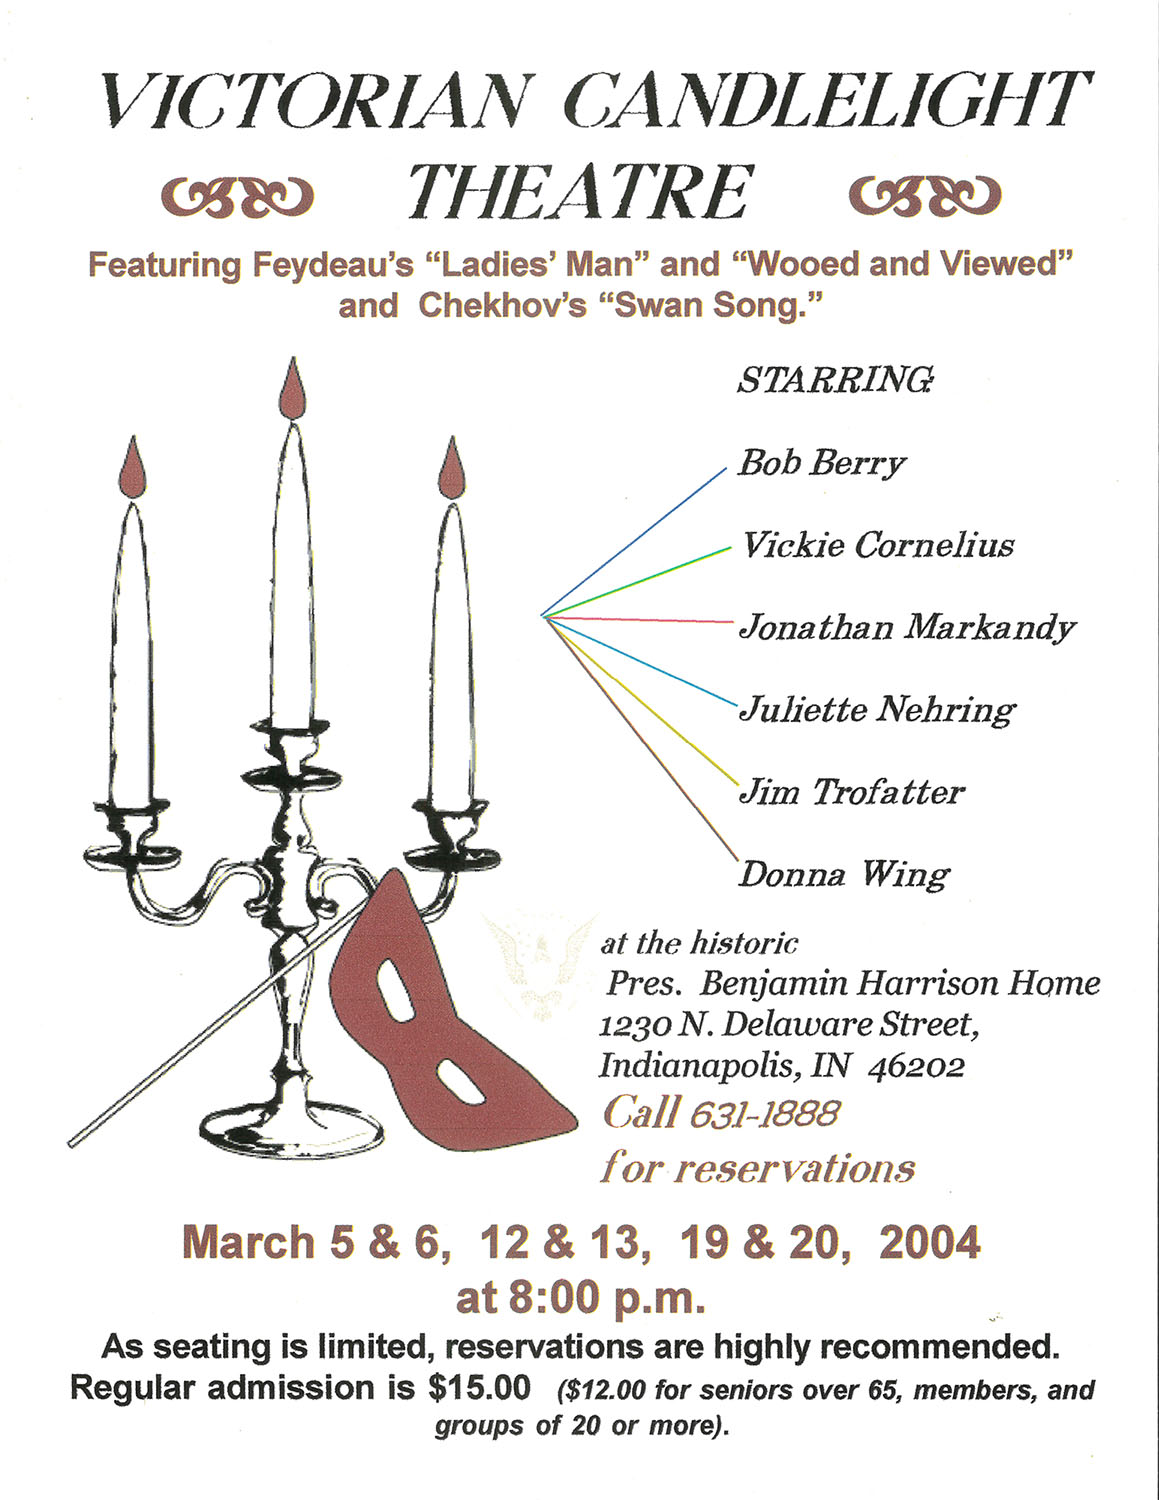 Graphic image of a candelabra with three candles and an opera mask. text reads: victorian candlelight theater, featuring feydeau's ladies' man and wooed and views and chekhov's swan song. starring bob berry, vickie cornelius, johnathan markandy, juliette nehring, jom trofatter, and donna wing at the historic president benjamin harrison home. 1230 north delaware street, indianapolis indiana, 46202. call 631 1888 for reservations. march 5 and 6, 12 and 13, 19 and 20, two thousand four at 8 p.m. as seating is limited, reservations are highly recommended. regular admission is fifteen dollars, or twelve dollars for seniors over 65, members, and groups of 20 or more.